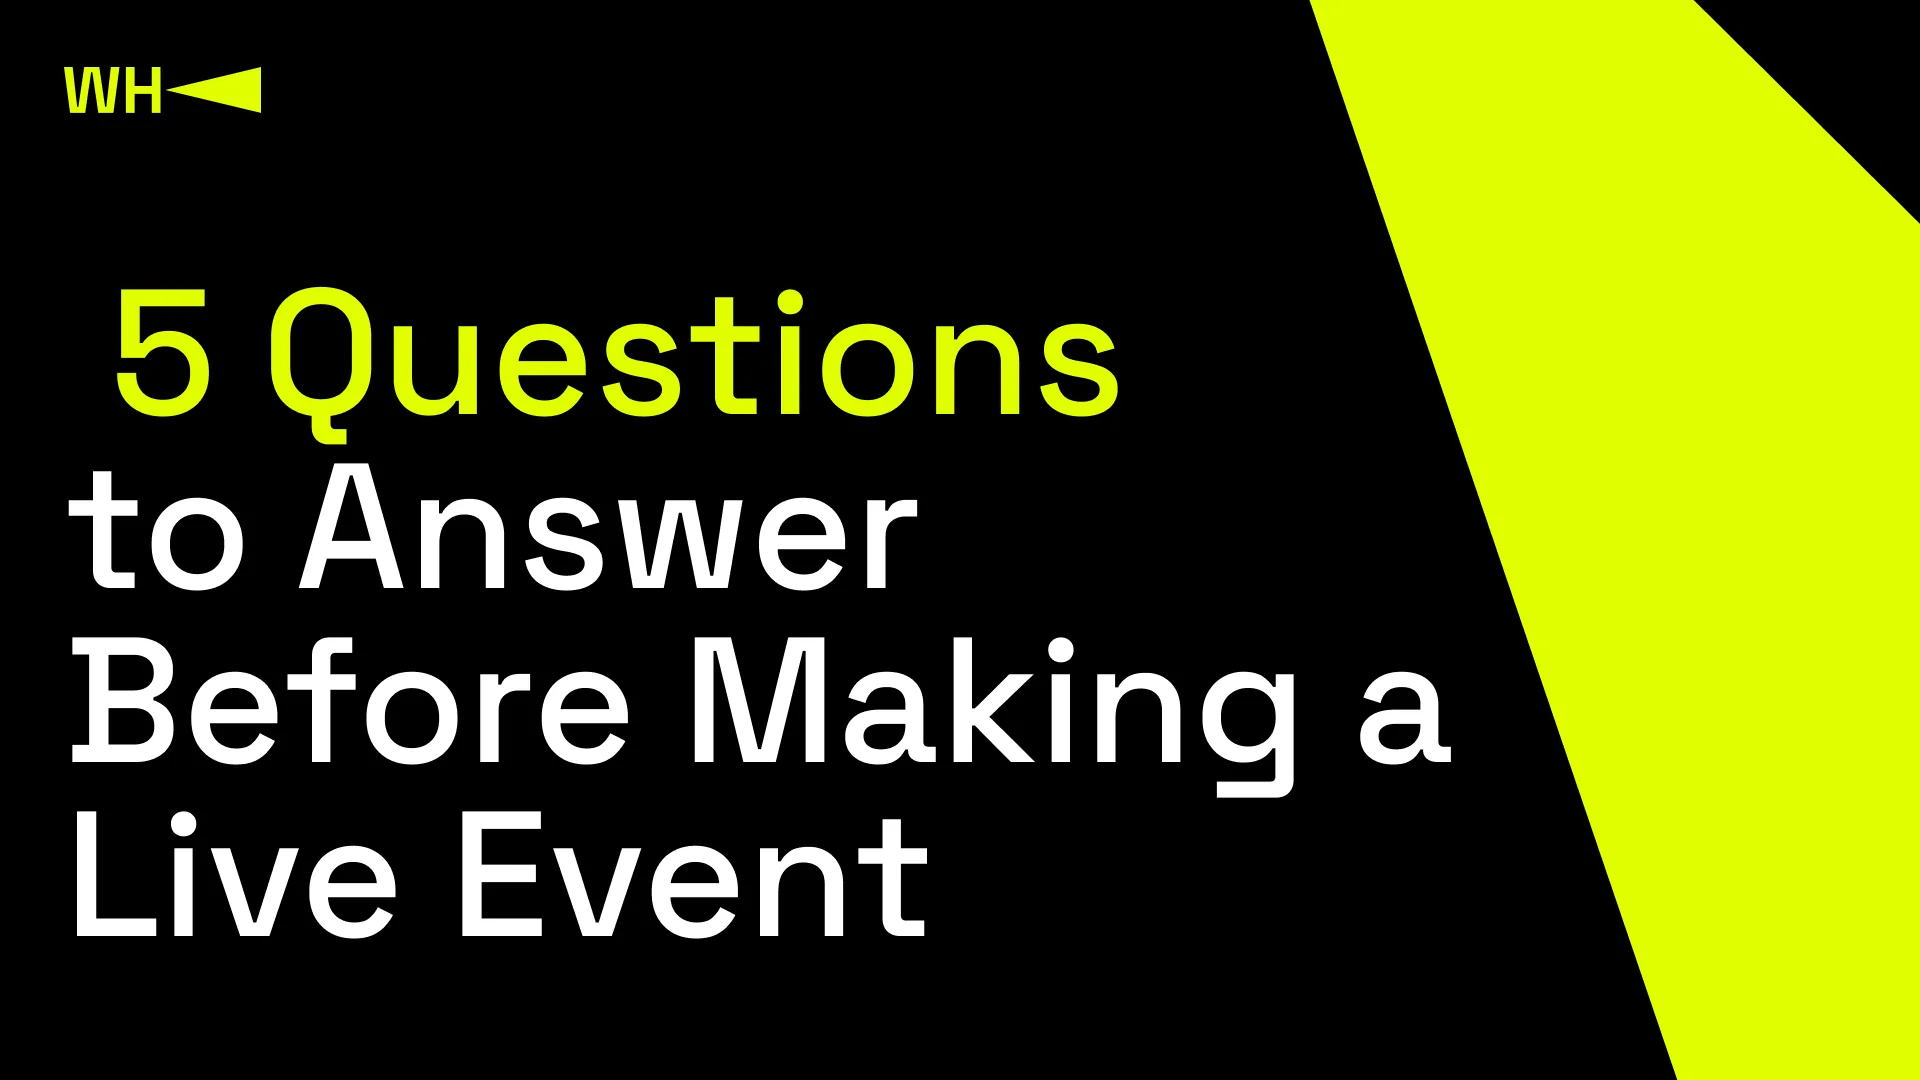 Five Questions To Answer Before Making a Live Event